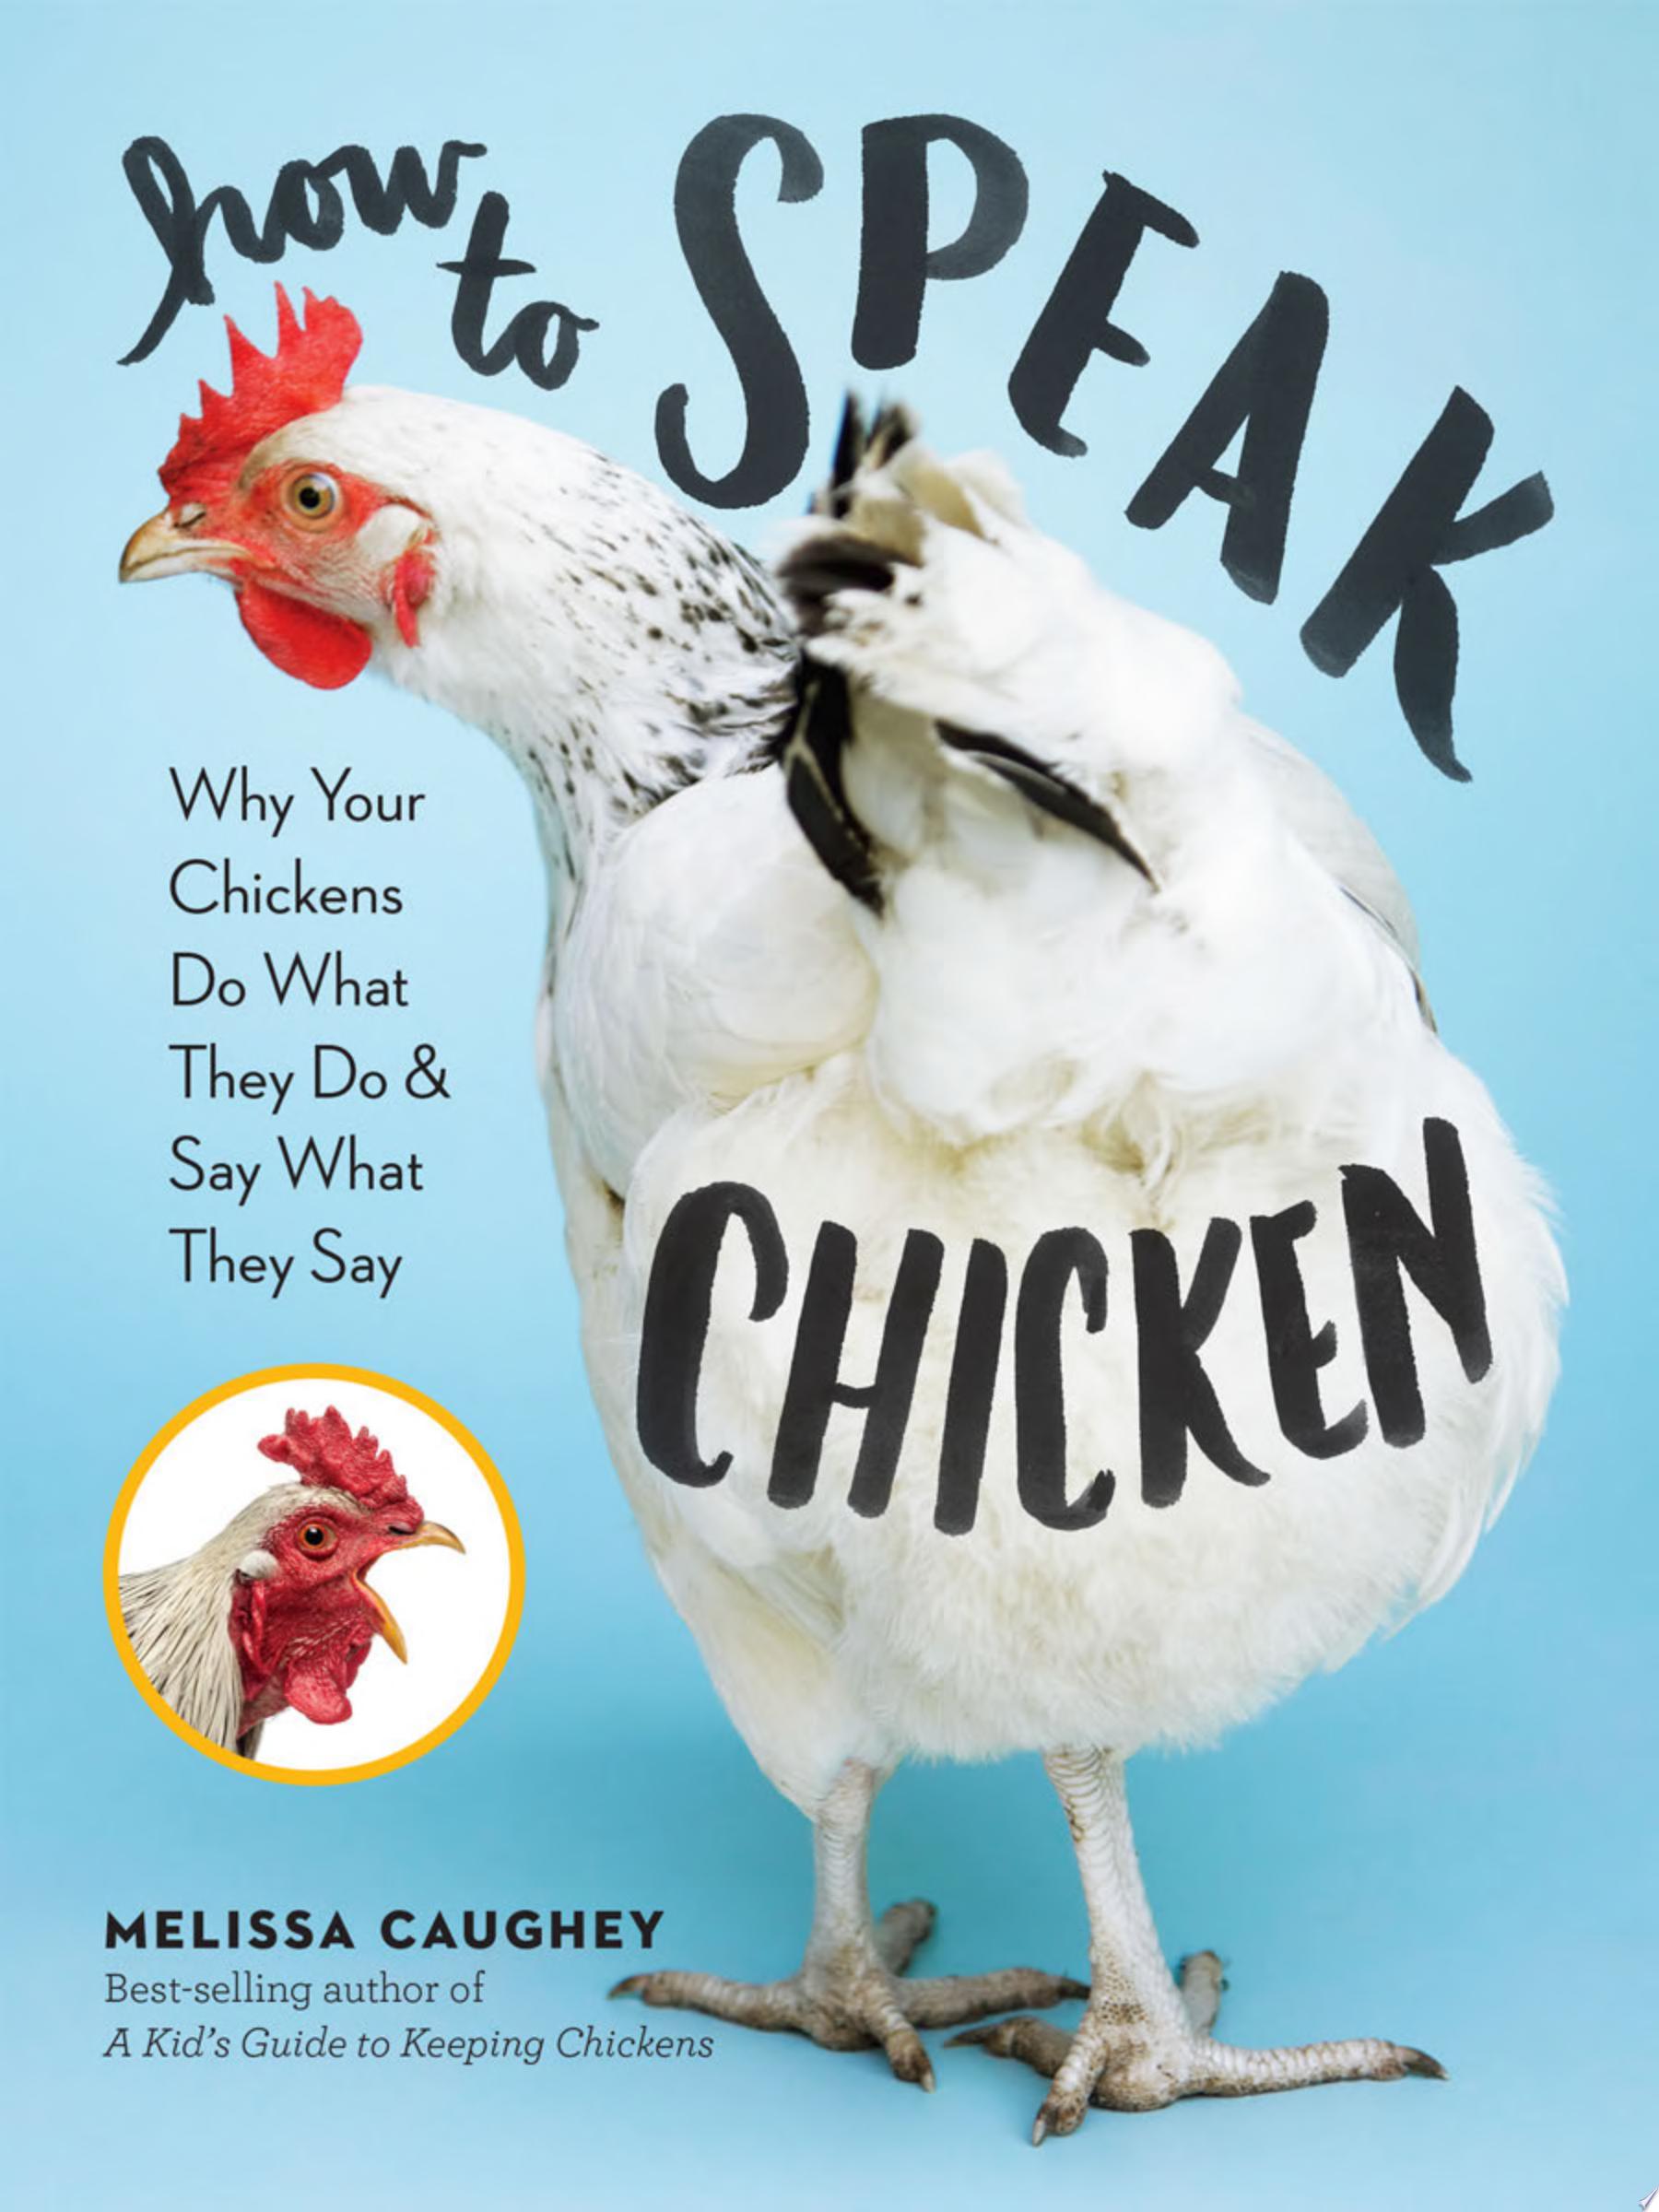 Image for "How to Speak Chicken"